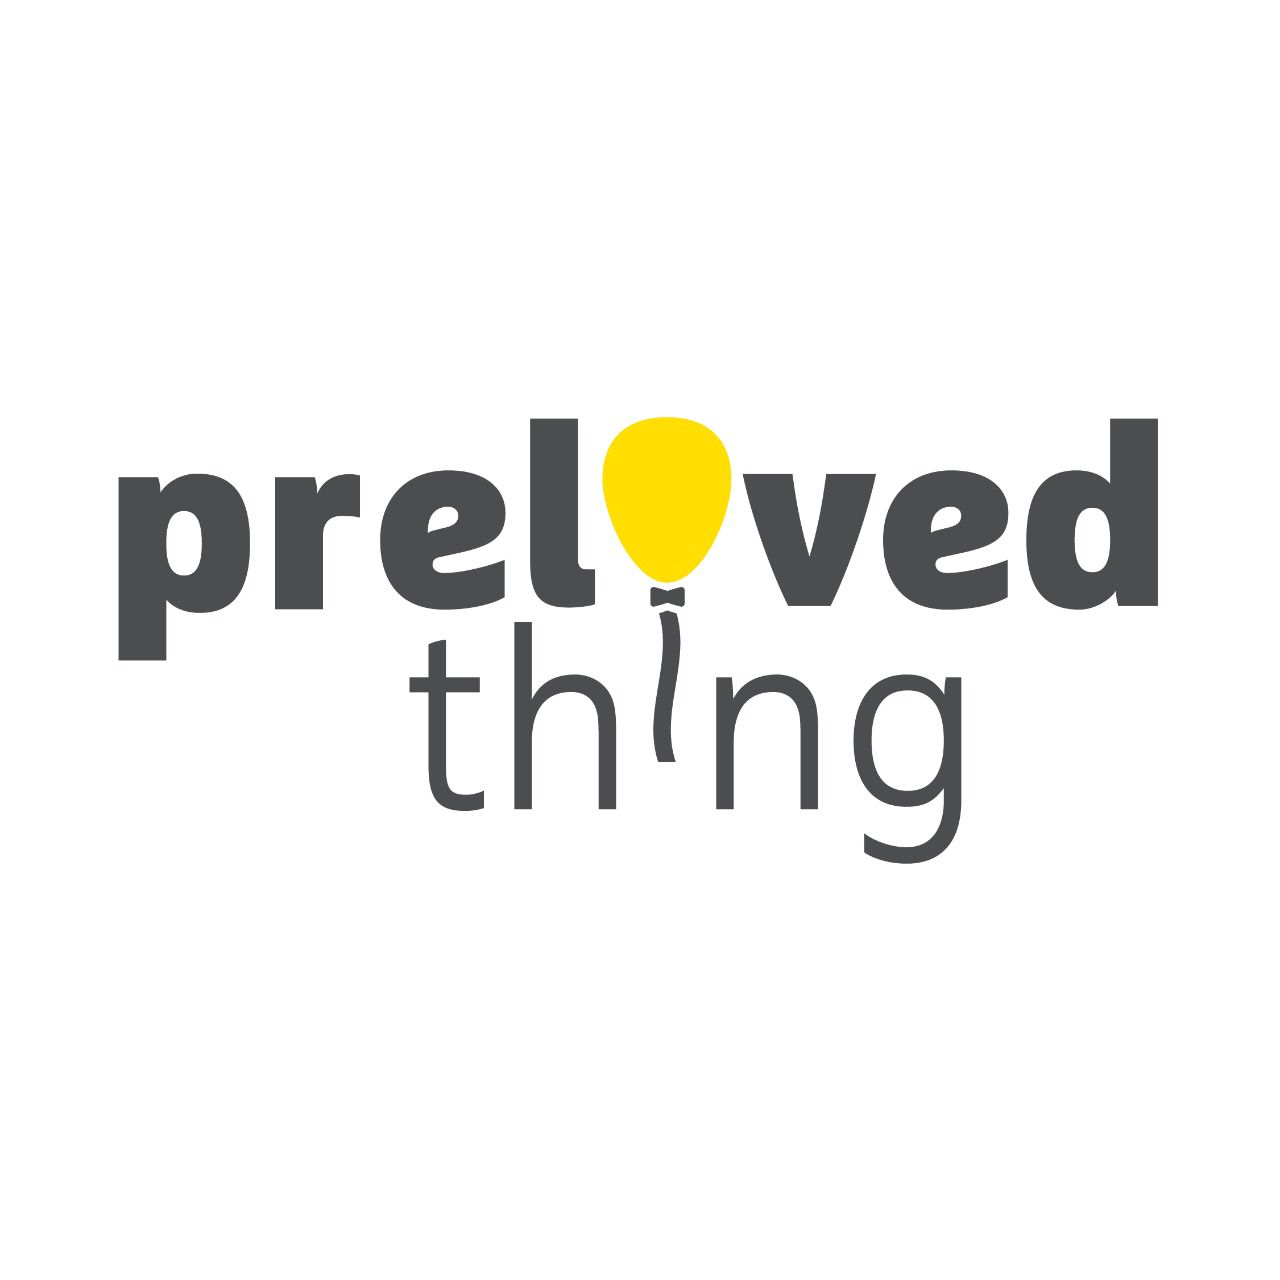 A Preloved Thing